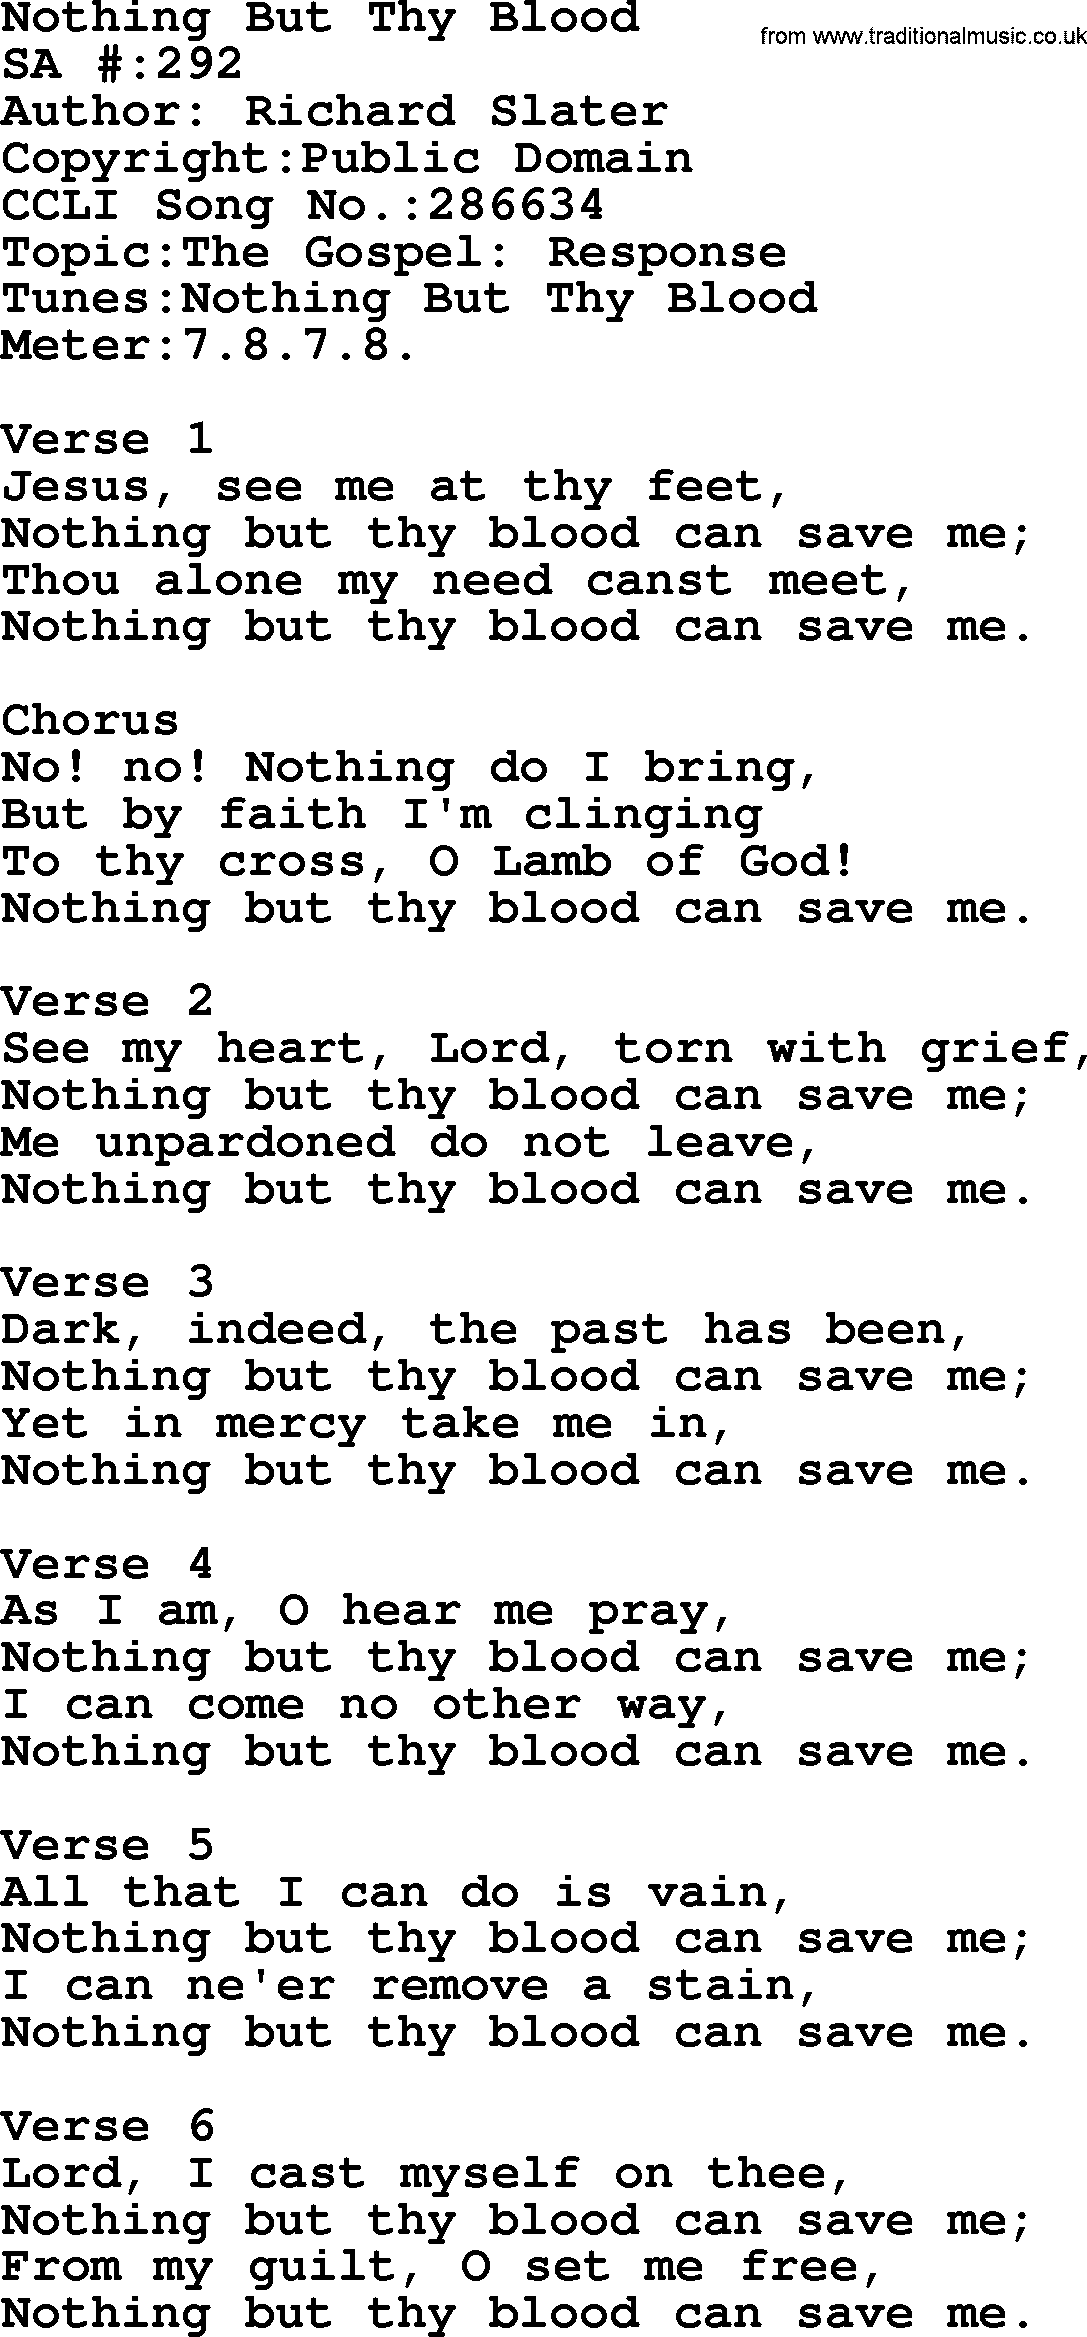 Salvation Army Hymnal, title: Nothing But Thy Blood, with lyrics and PDF,